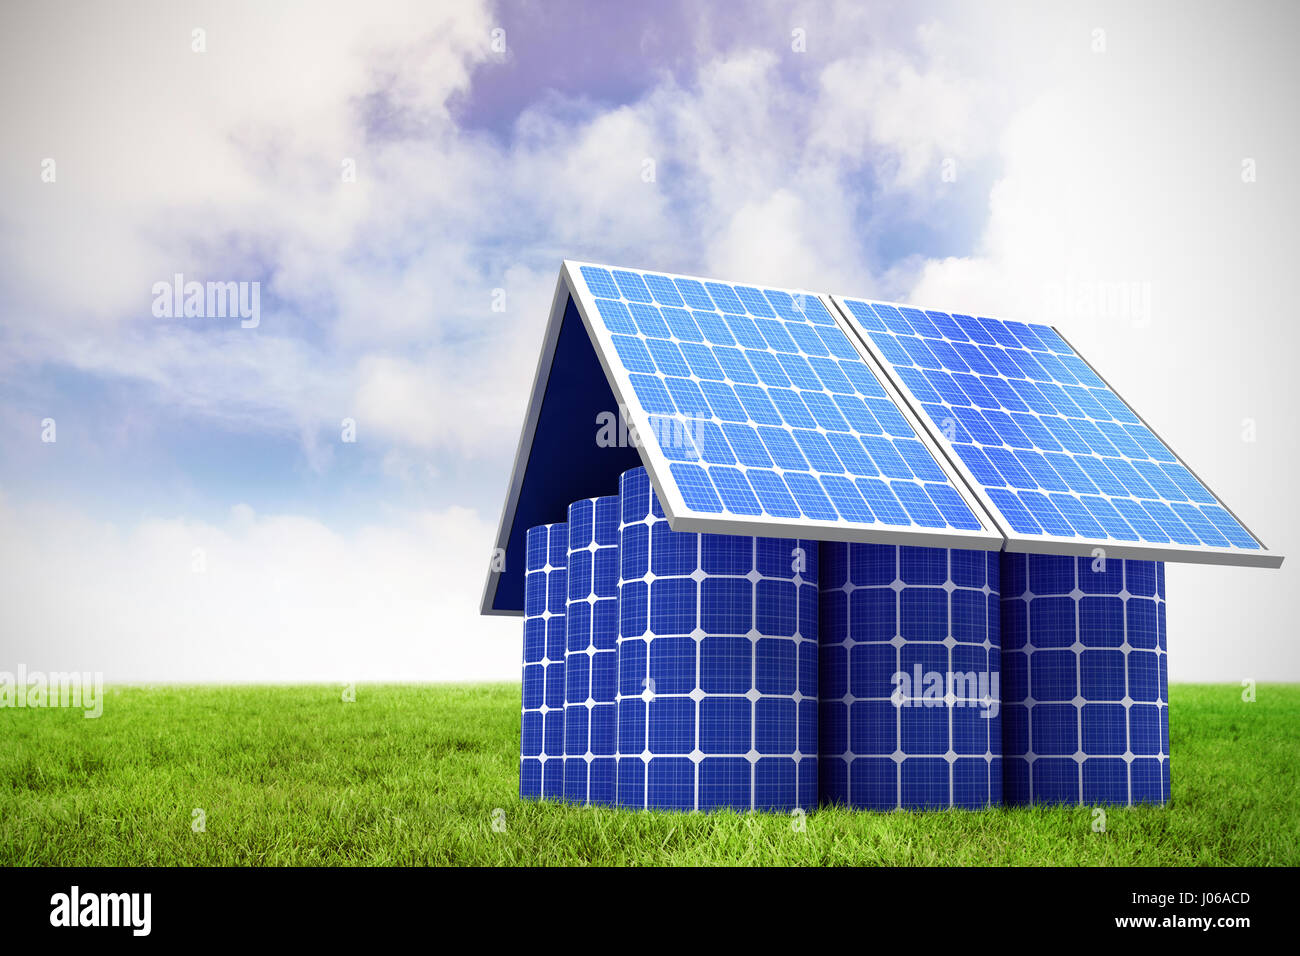 3d image of model home made from solar panels and cells against blue sky over green field Stock Photo